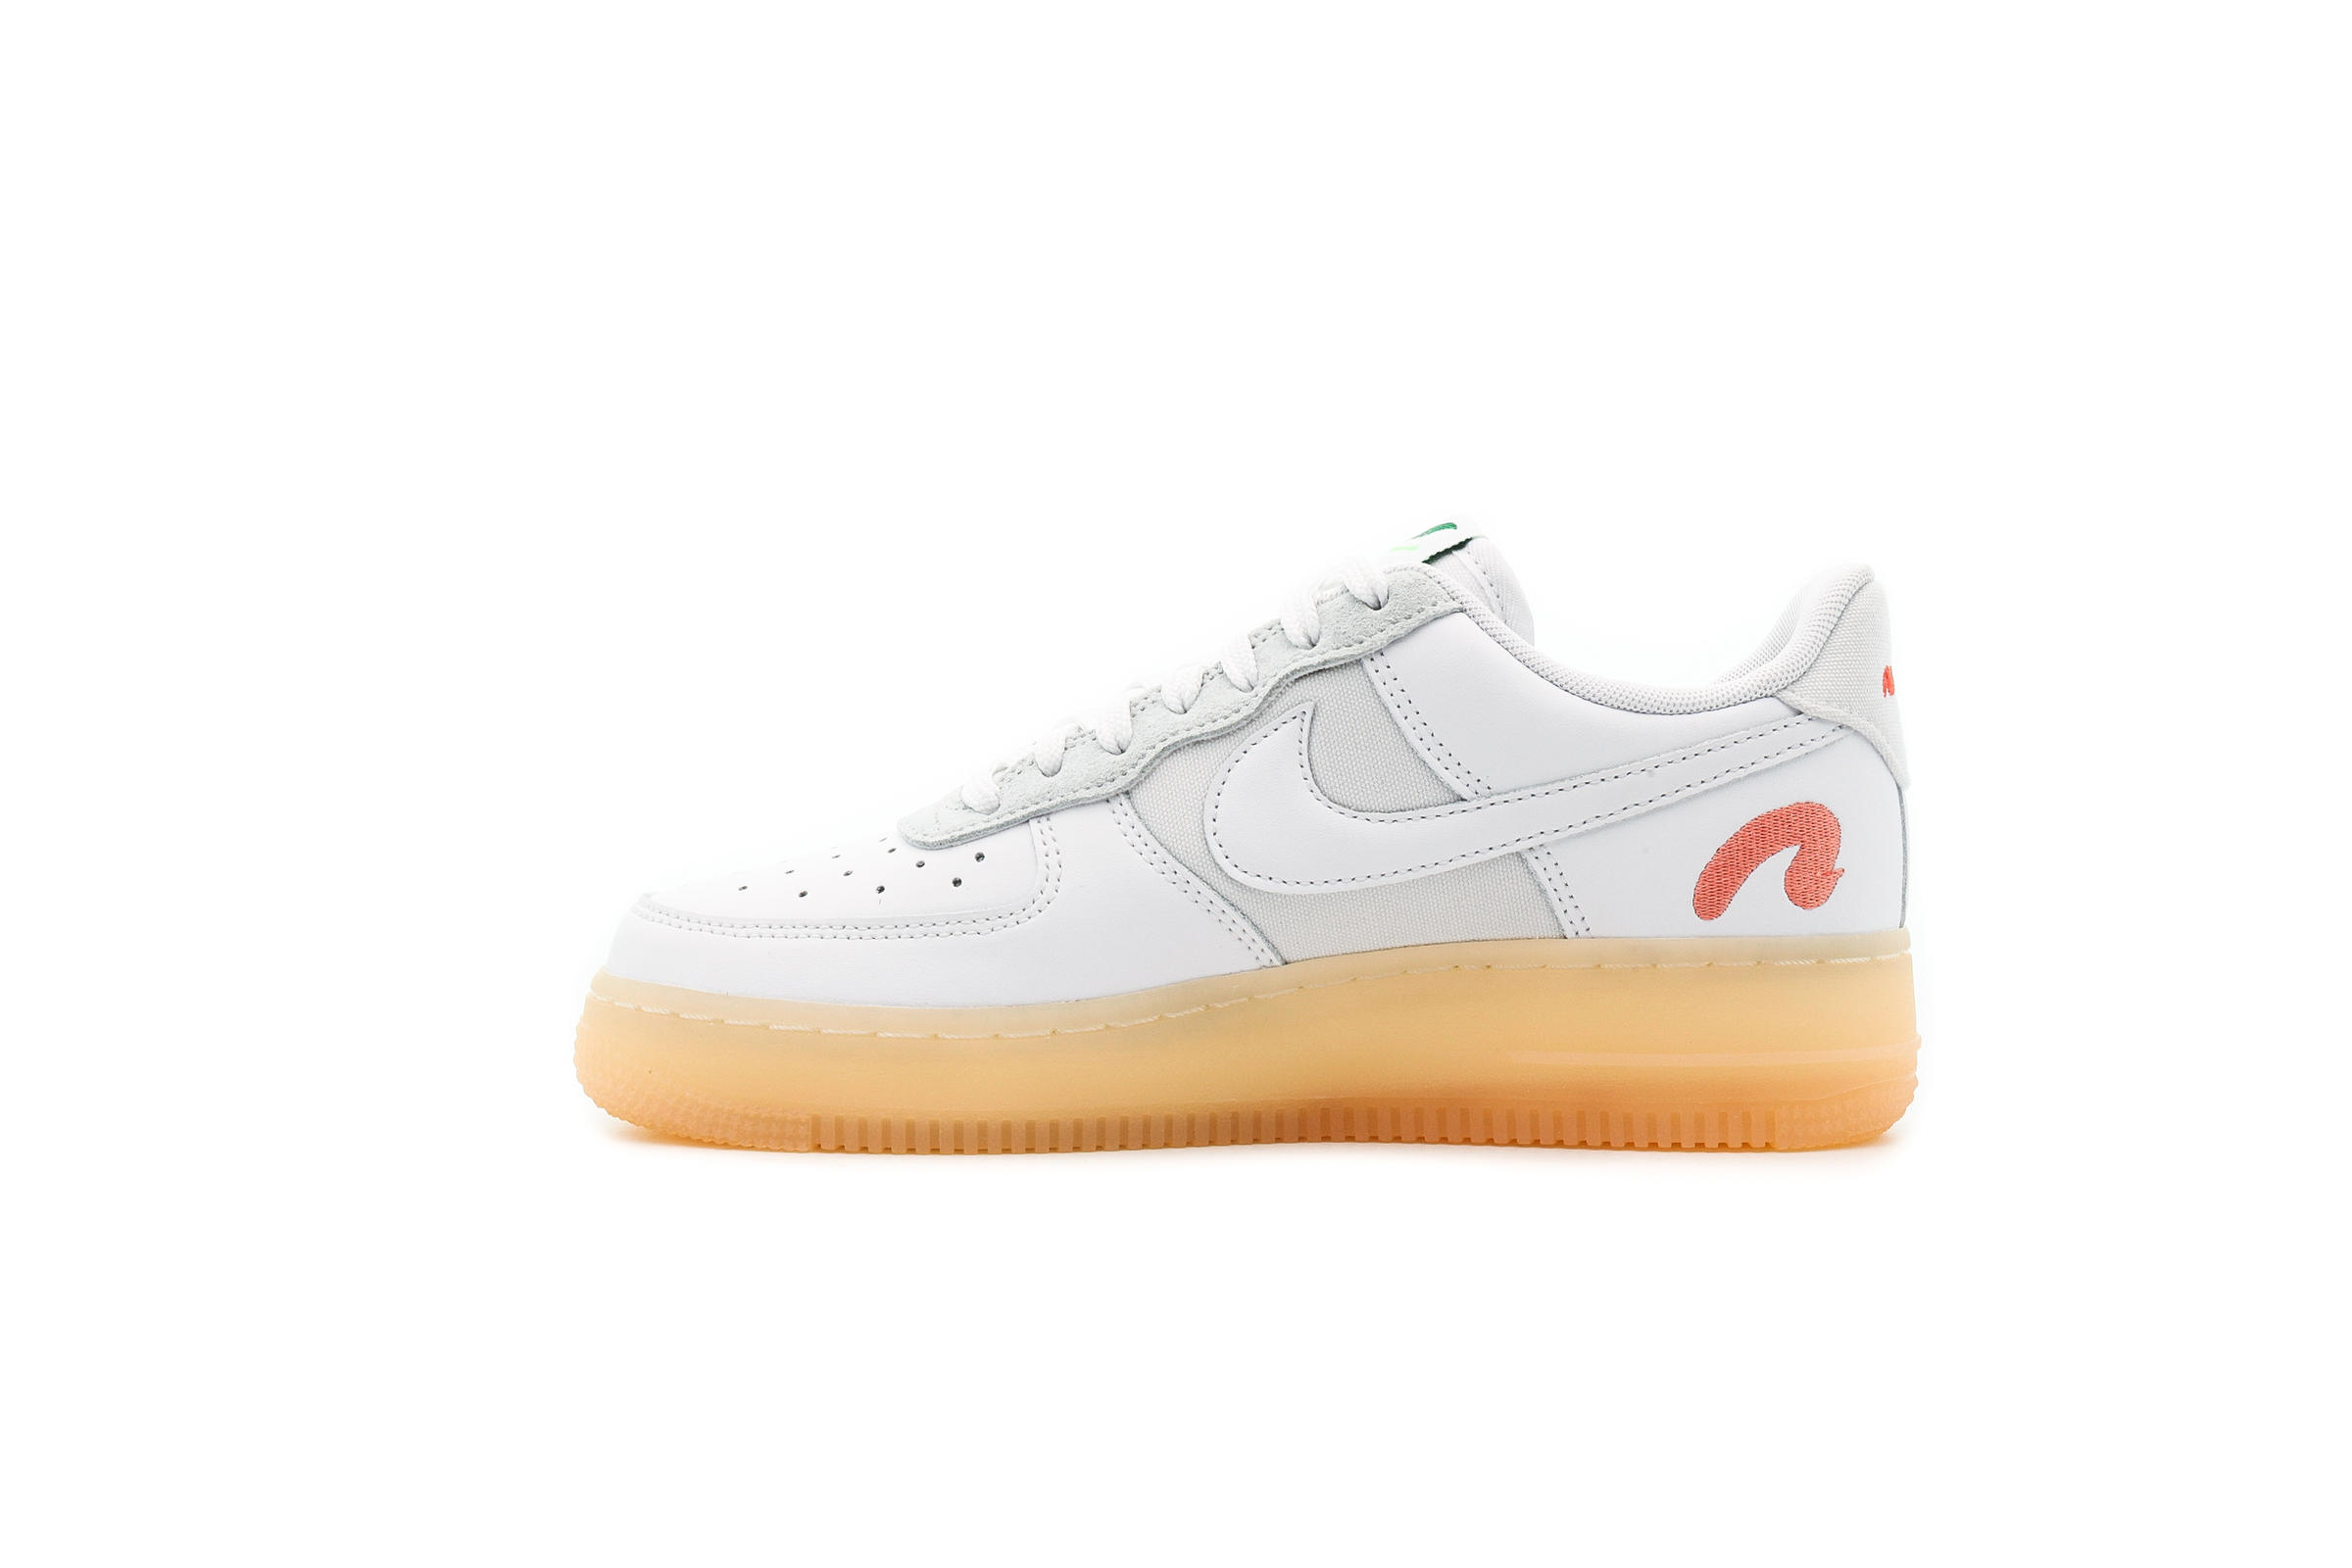 Nike FLYLEATHER AIR FORCE 1 "WHITE"